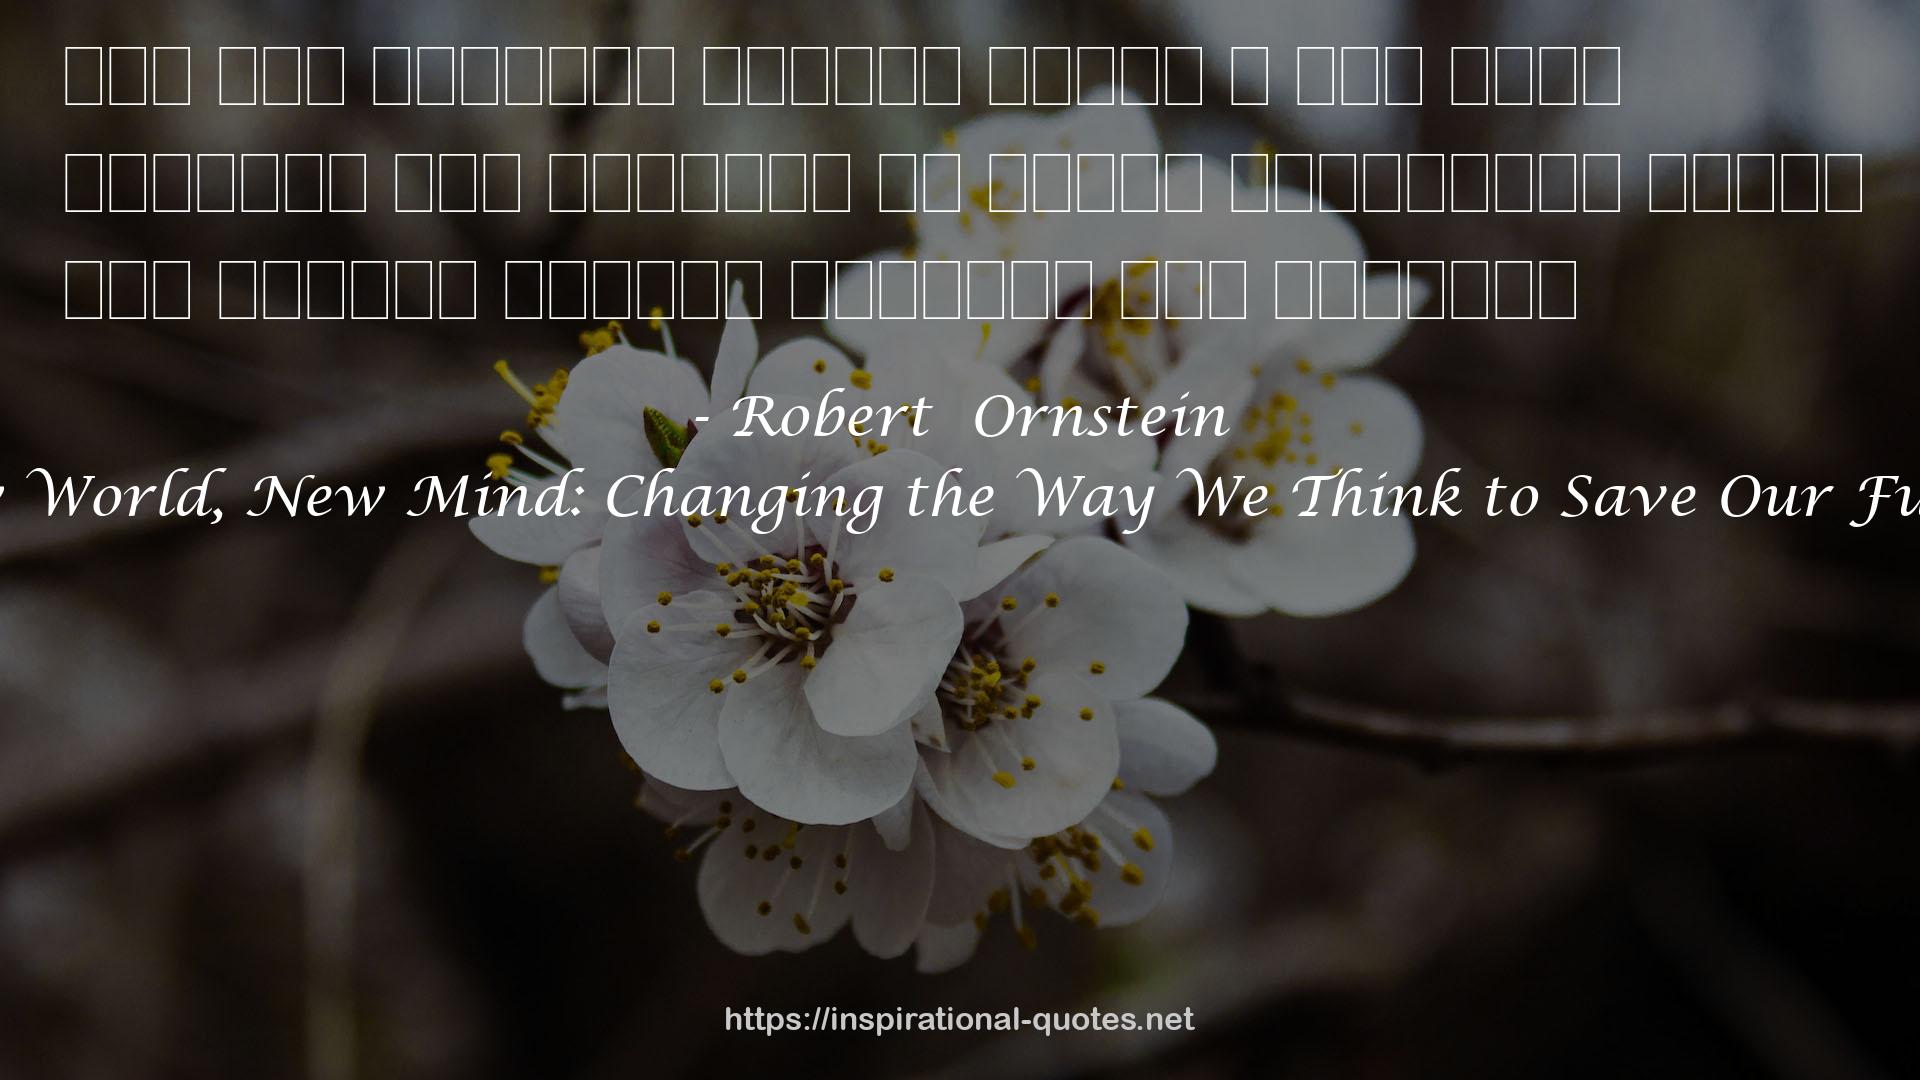 New World, New Mind: Changing the Way We Think to Save Our Future QUOTES